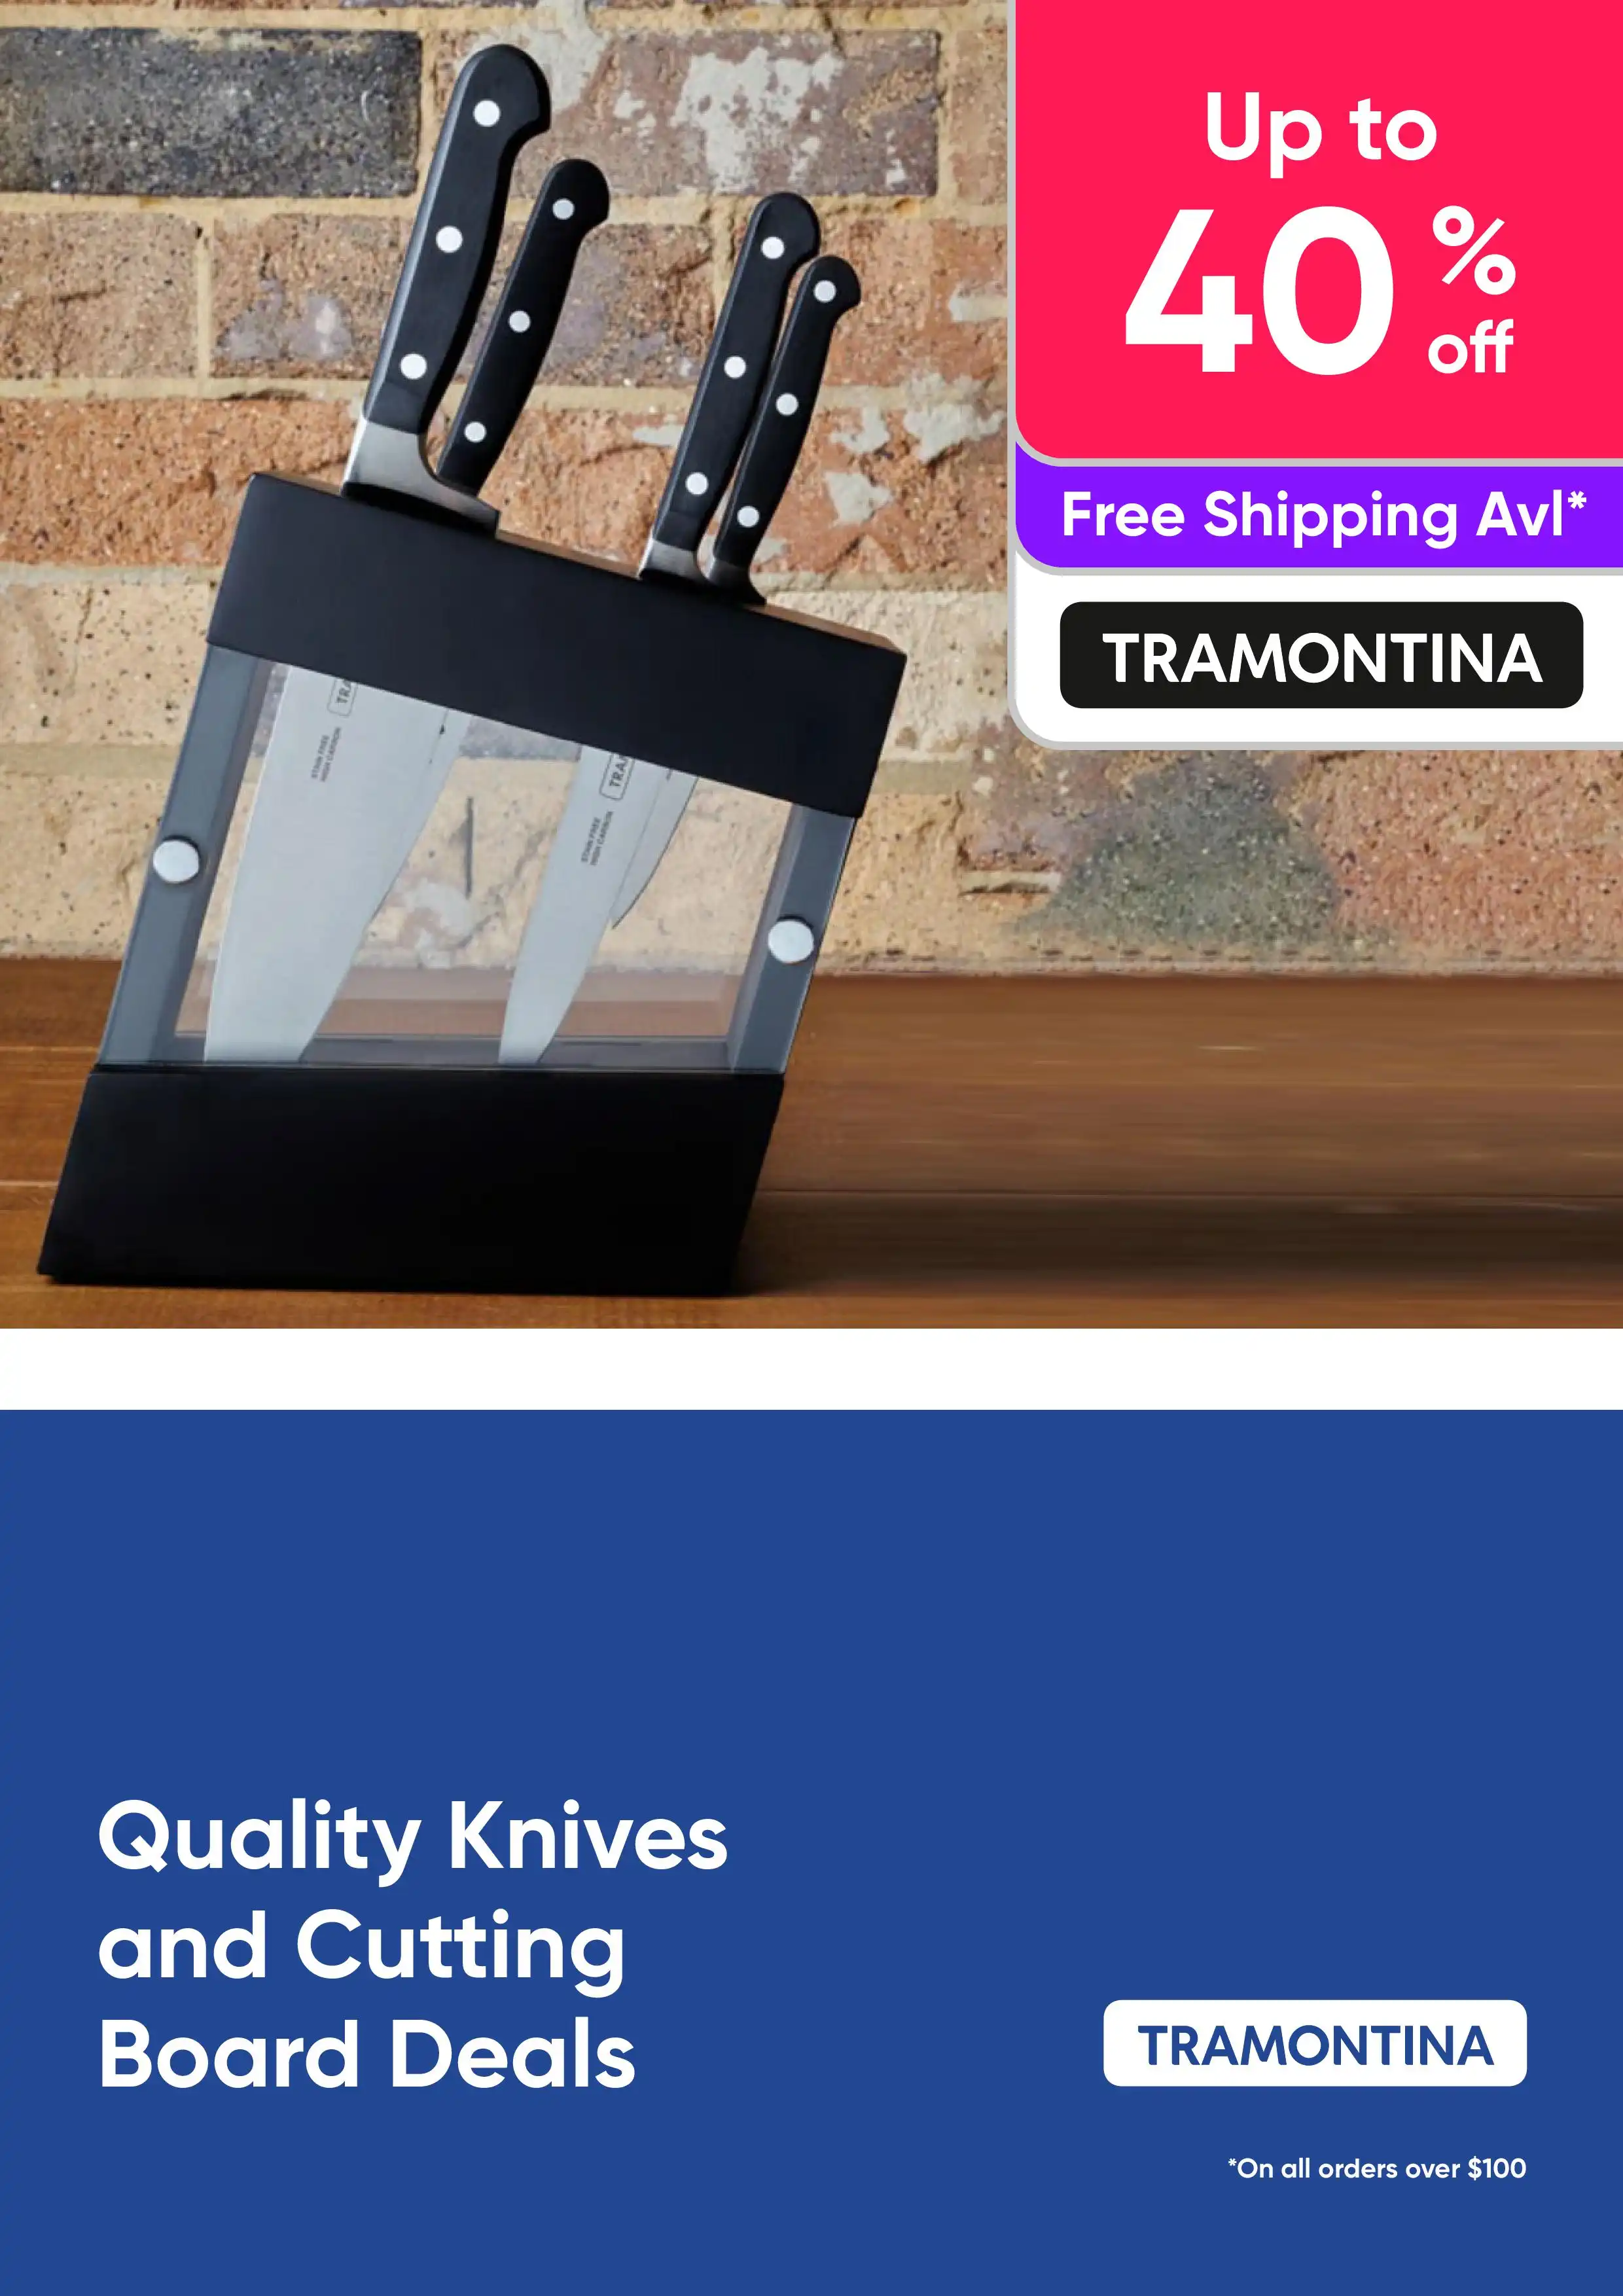 Tramontina Quality Knives and Cutting Board Deals - Up to 40% off